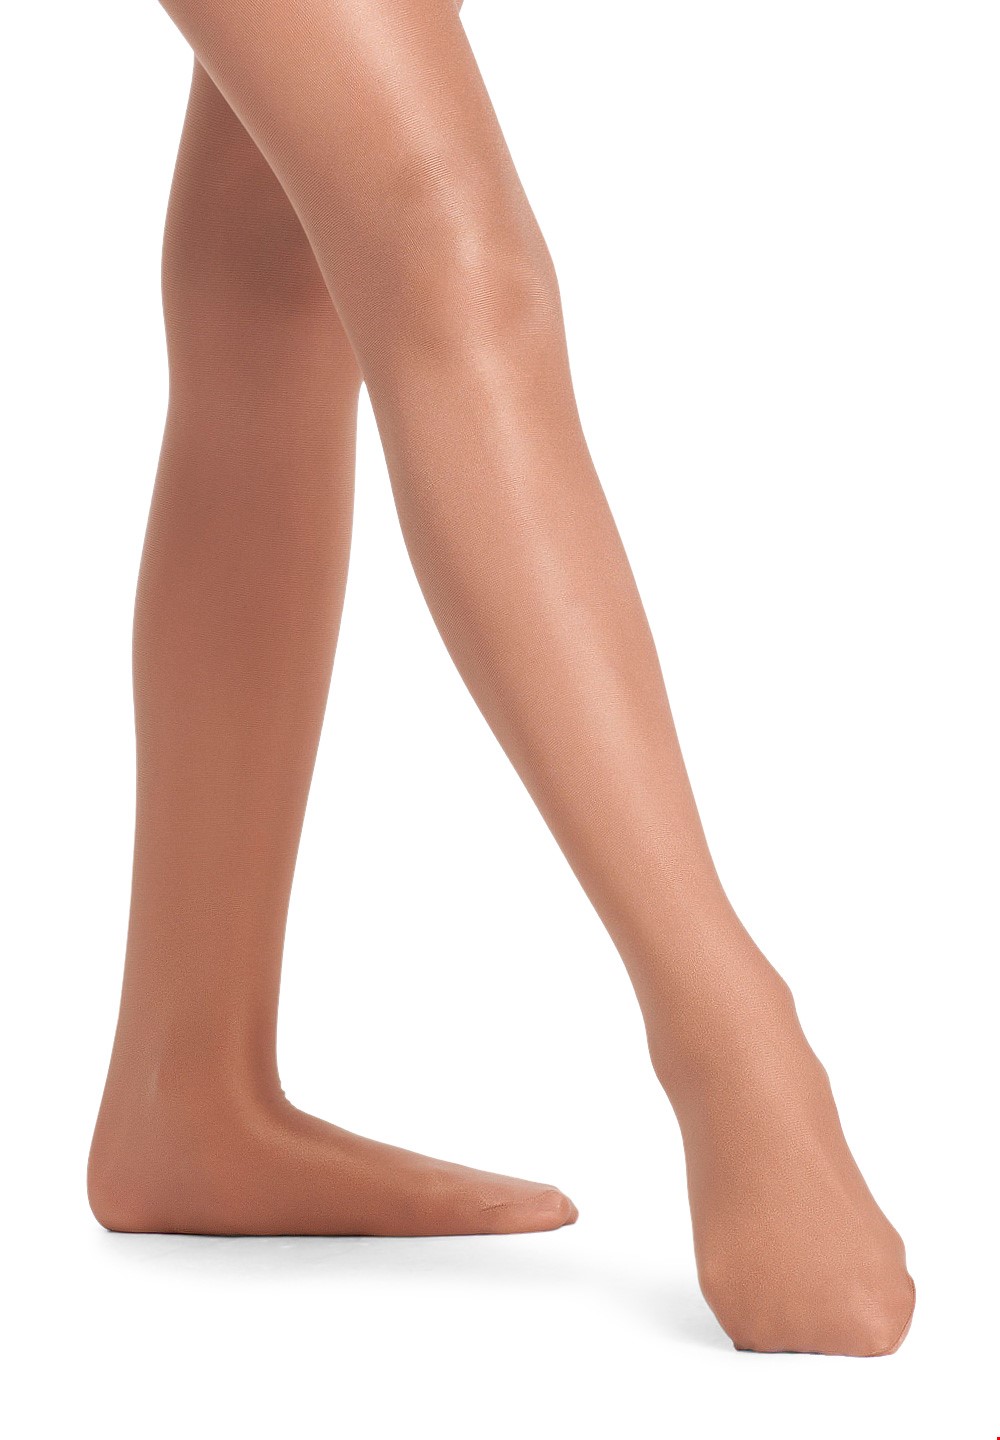 Danskin Shimmery Tights Tights Dance | – Girls Children Tights Footed Ultra